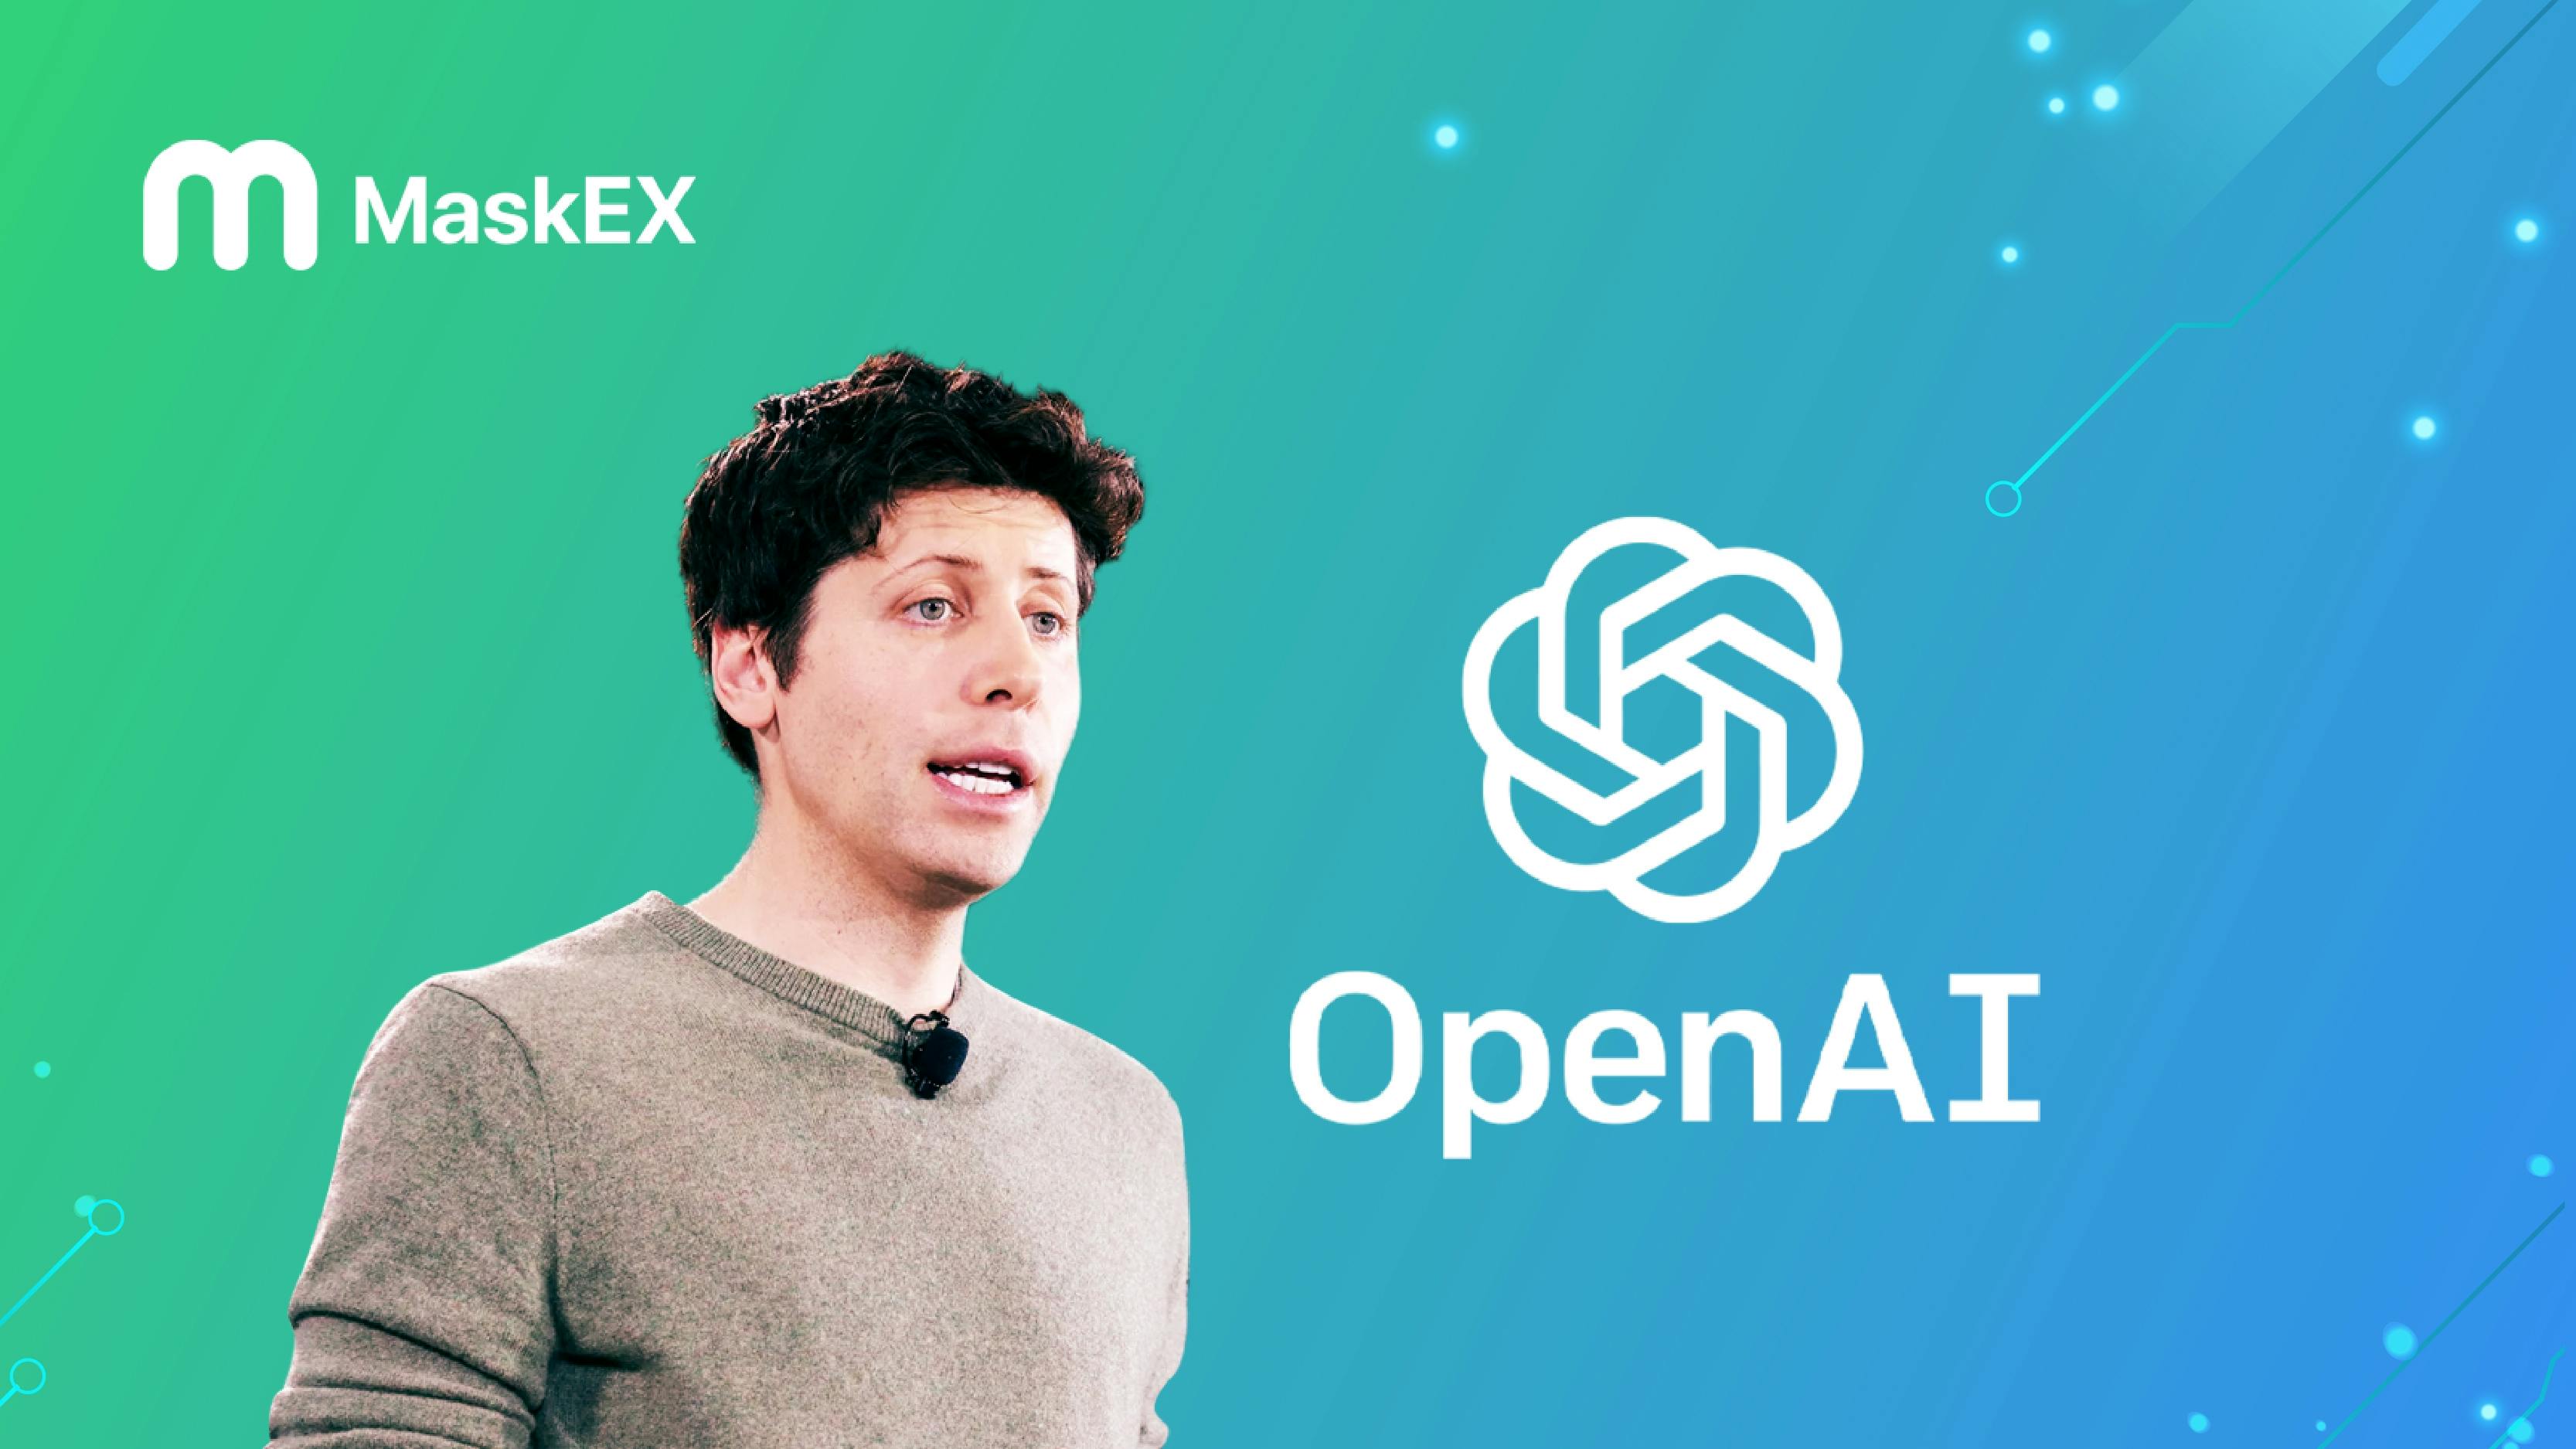 Sam Altman's Unexpected Exit from OpenAI and the Tumultuous Aftermath